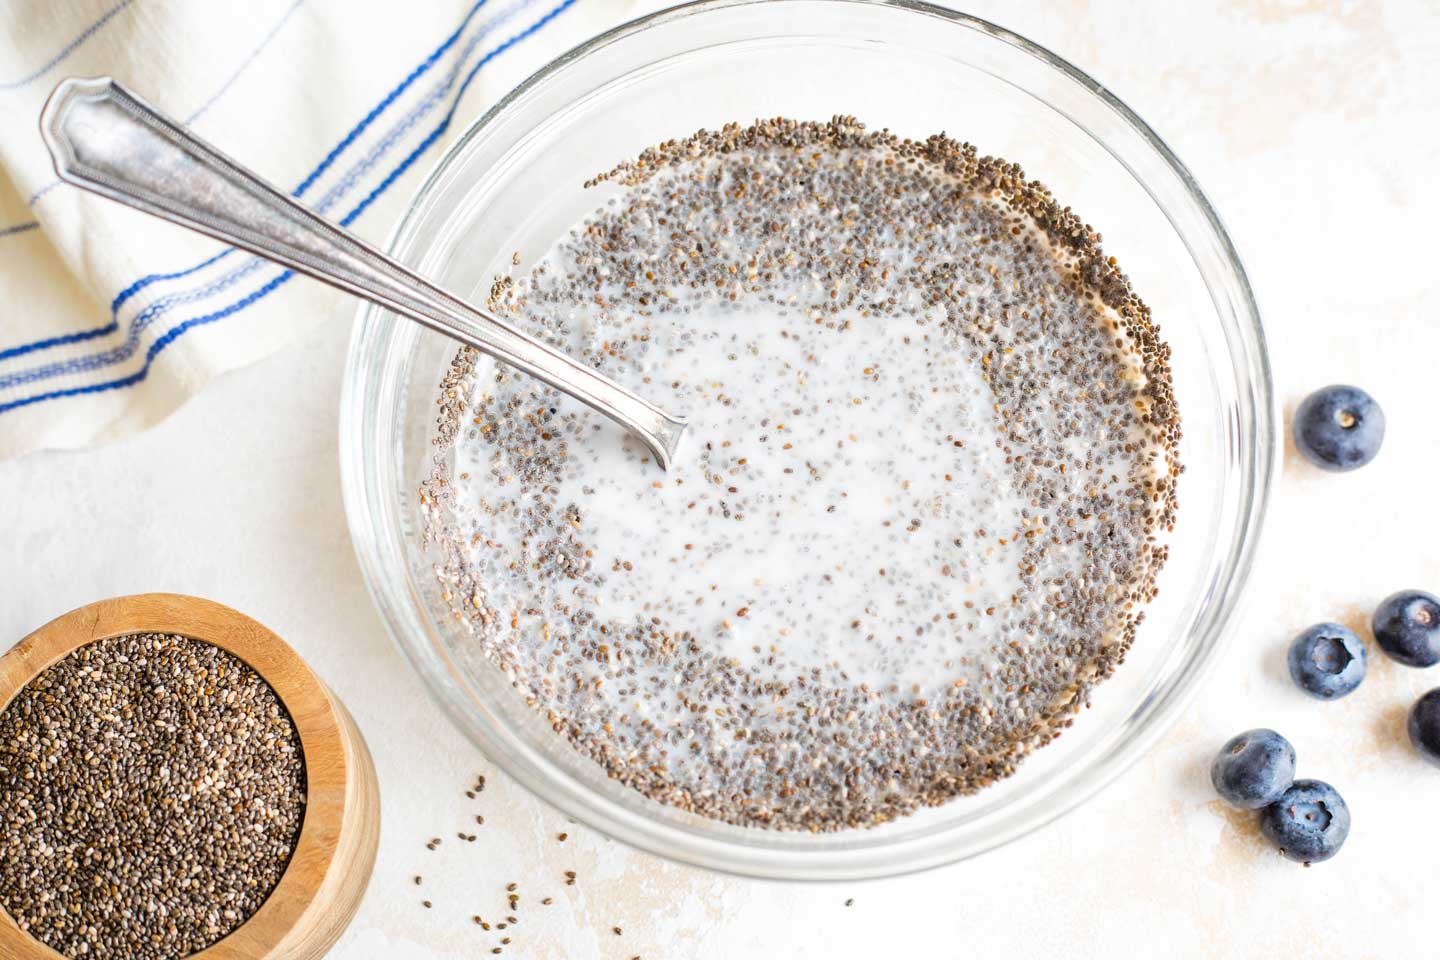 mixing bowl with chia seeds and coconut milk, just starting to be stirred together